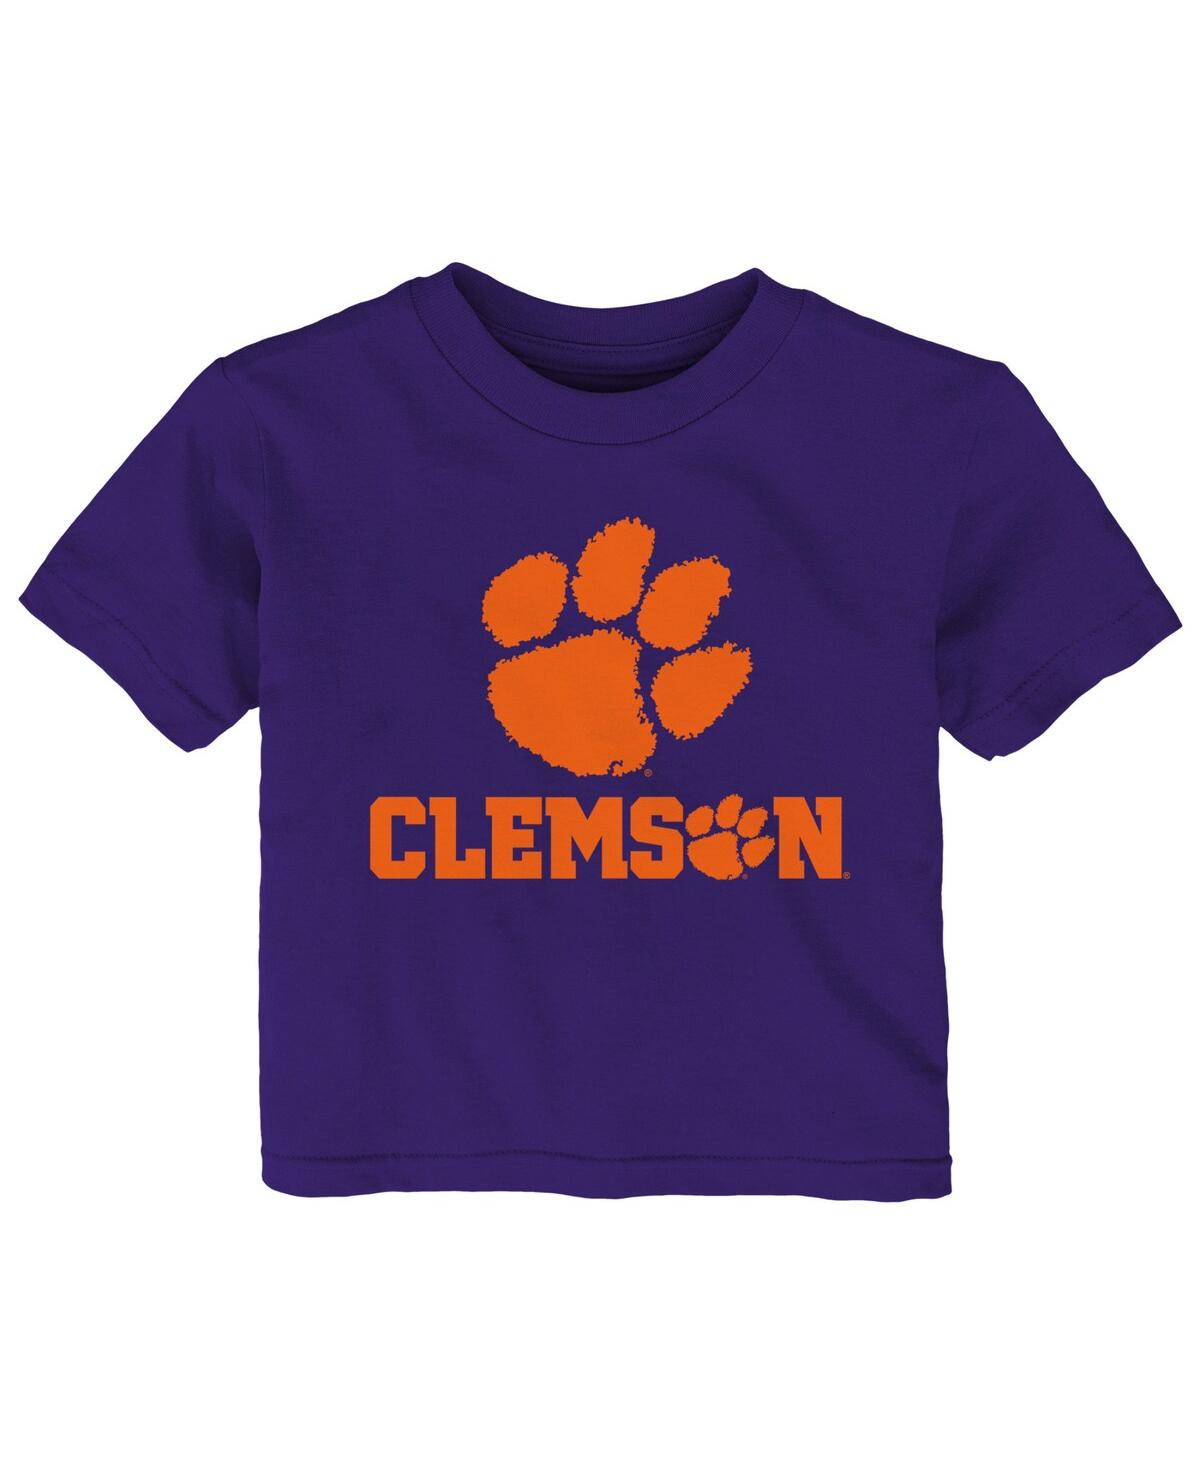 Outerstuff Babies' Infant Boys And Girls Purple Clemson Tigers Team Lockup T-shirt